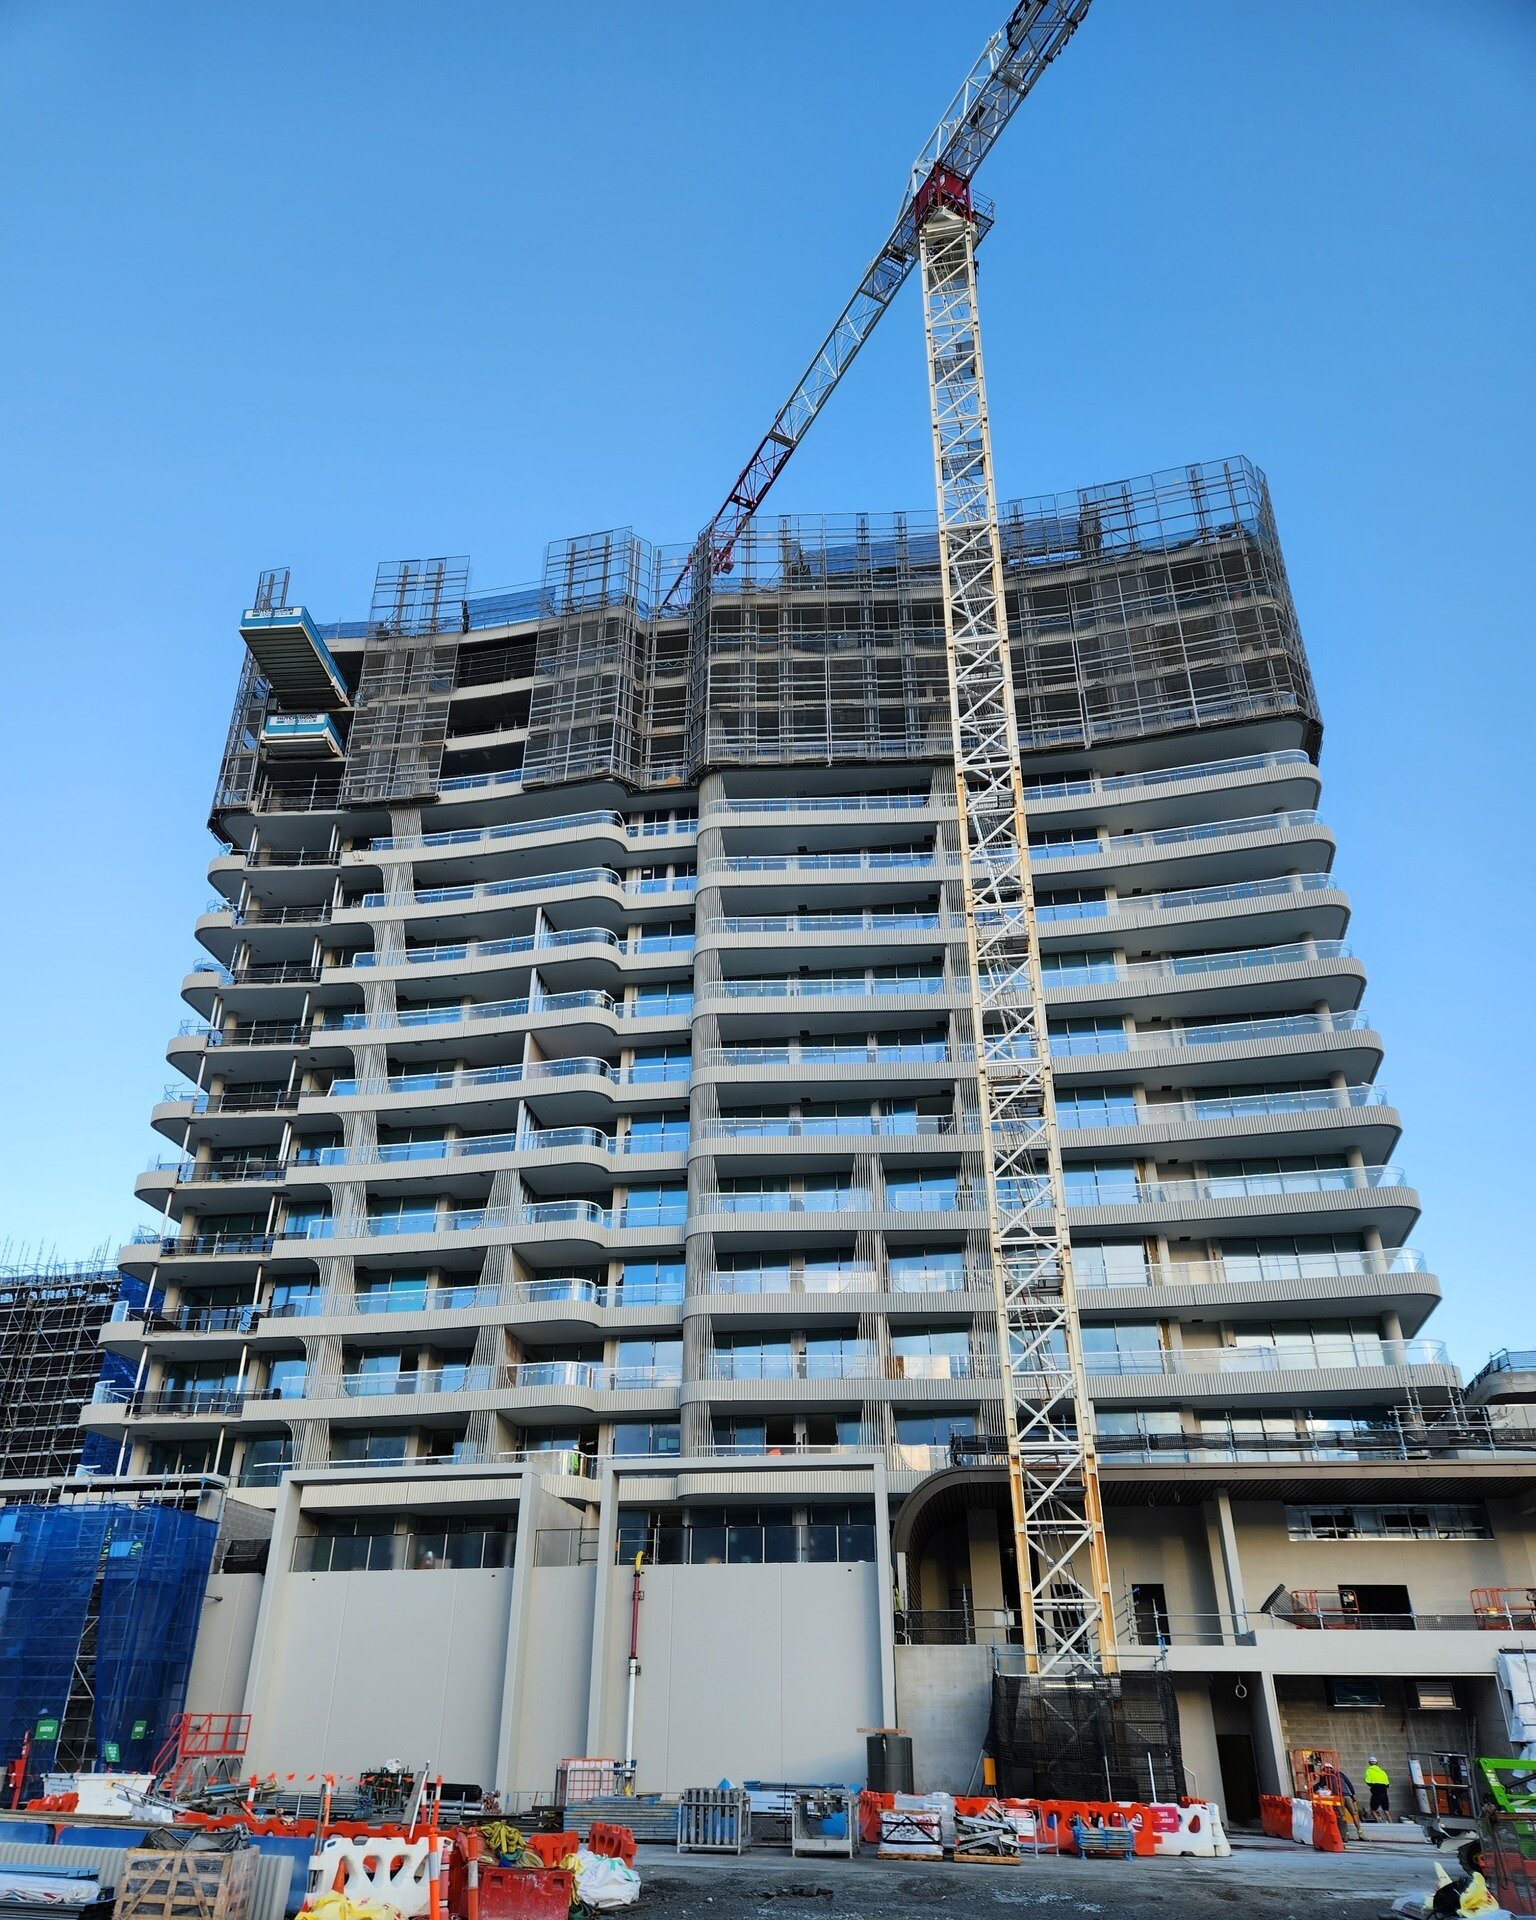 Miles Residences // Kirra
.
The Miles Residence is officially topped out! 
The first units on the lower levels are finished and the outlines of the pool and common areas are distinguishable. 
.
Our crew is currently completing rough-in in the last le